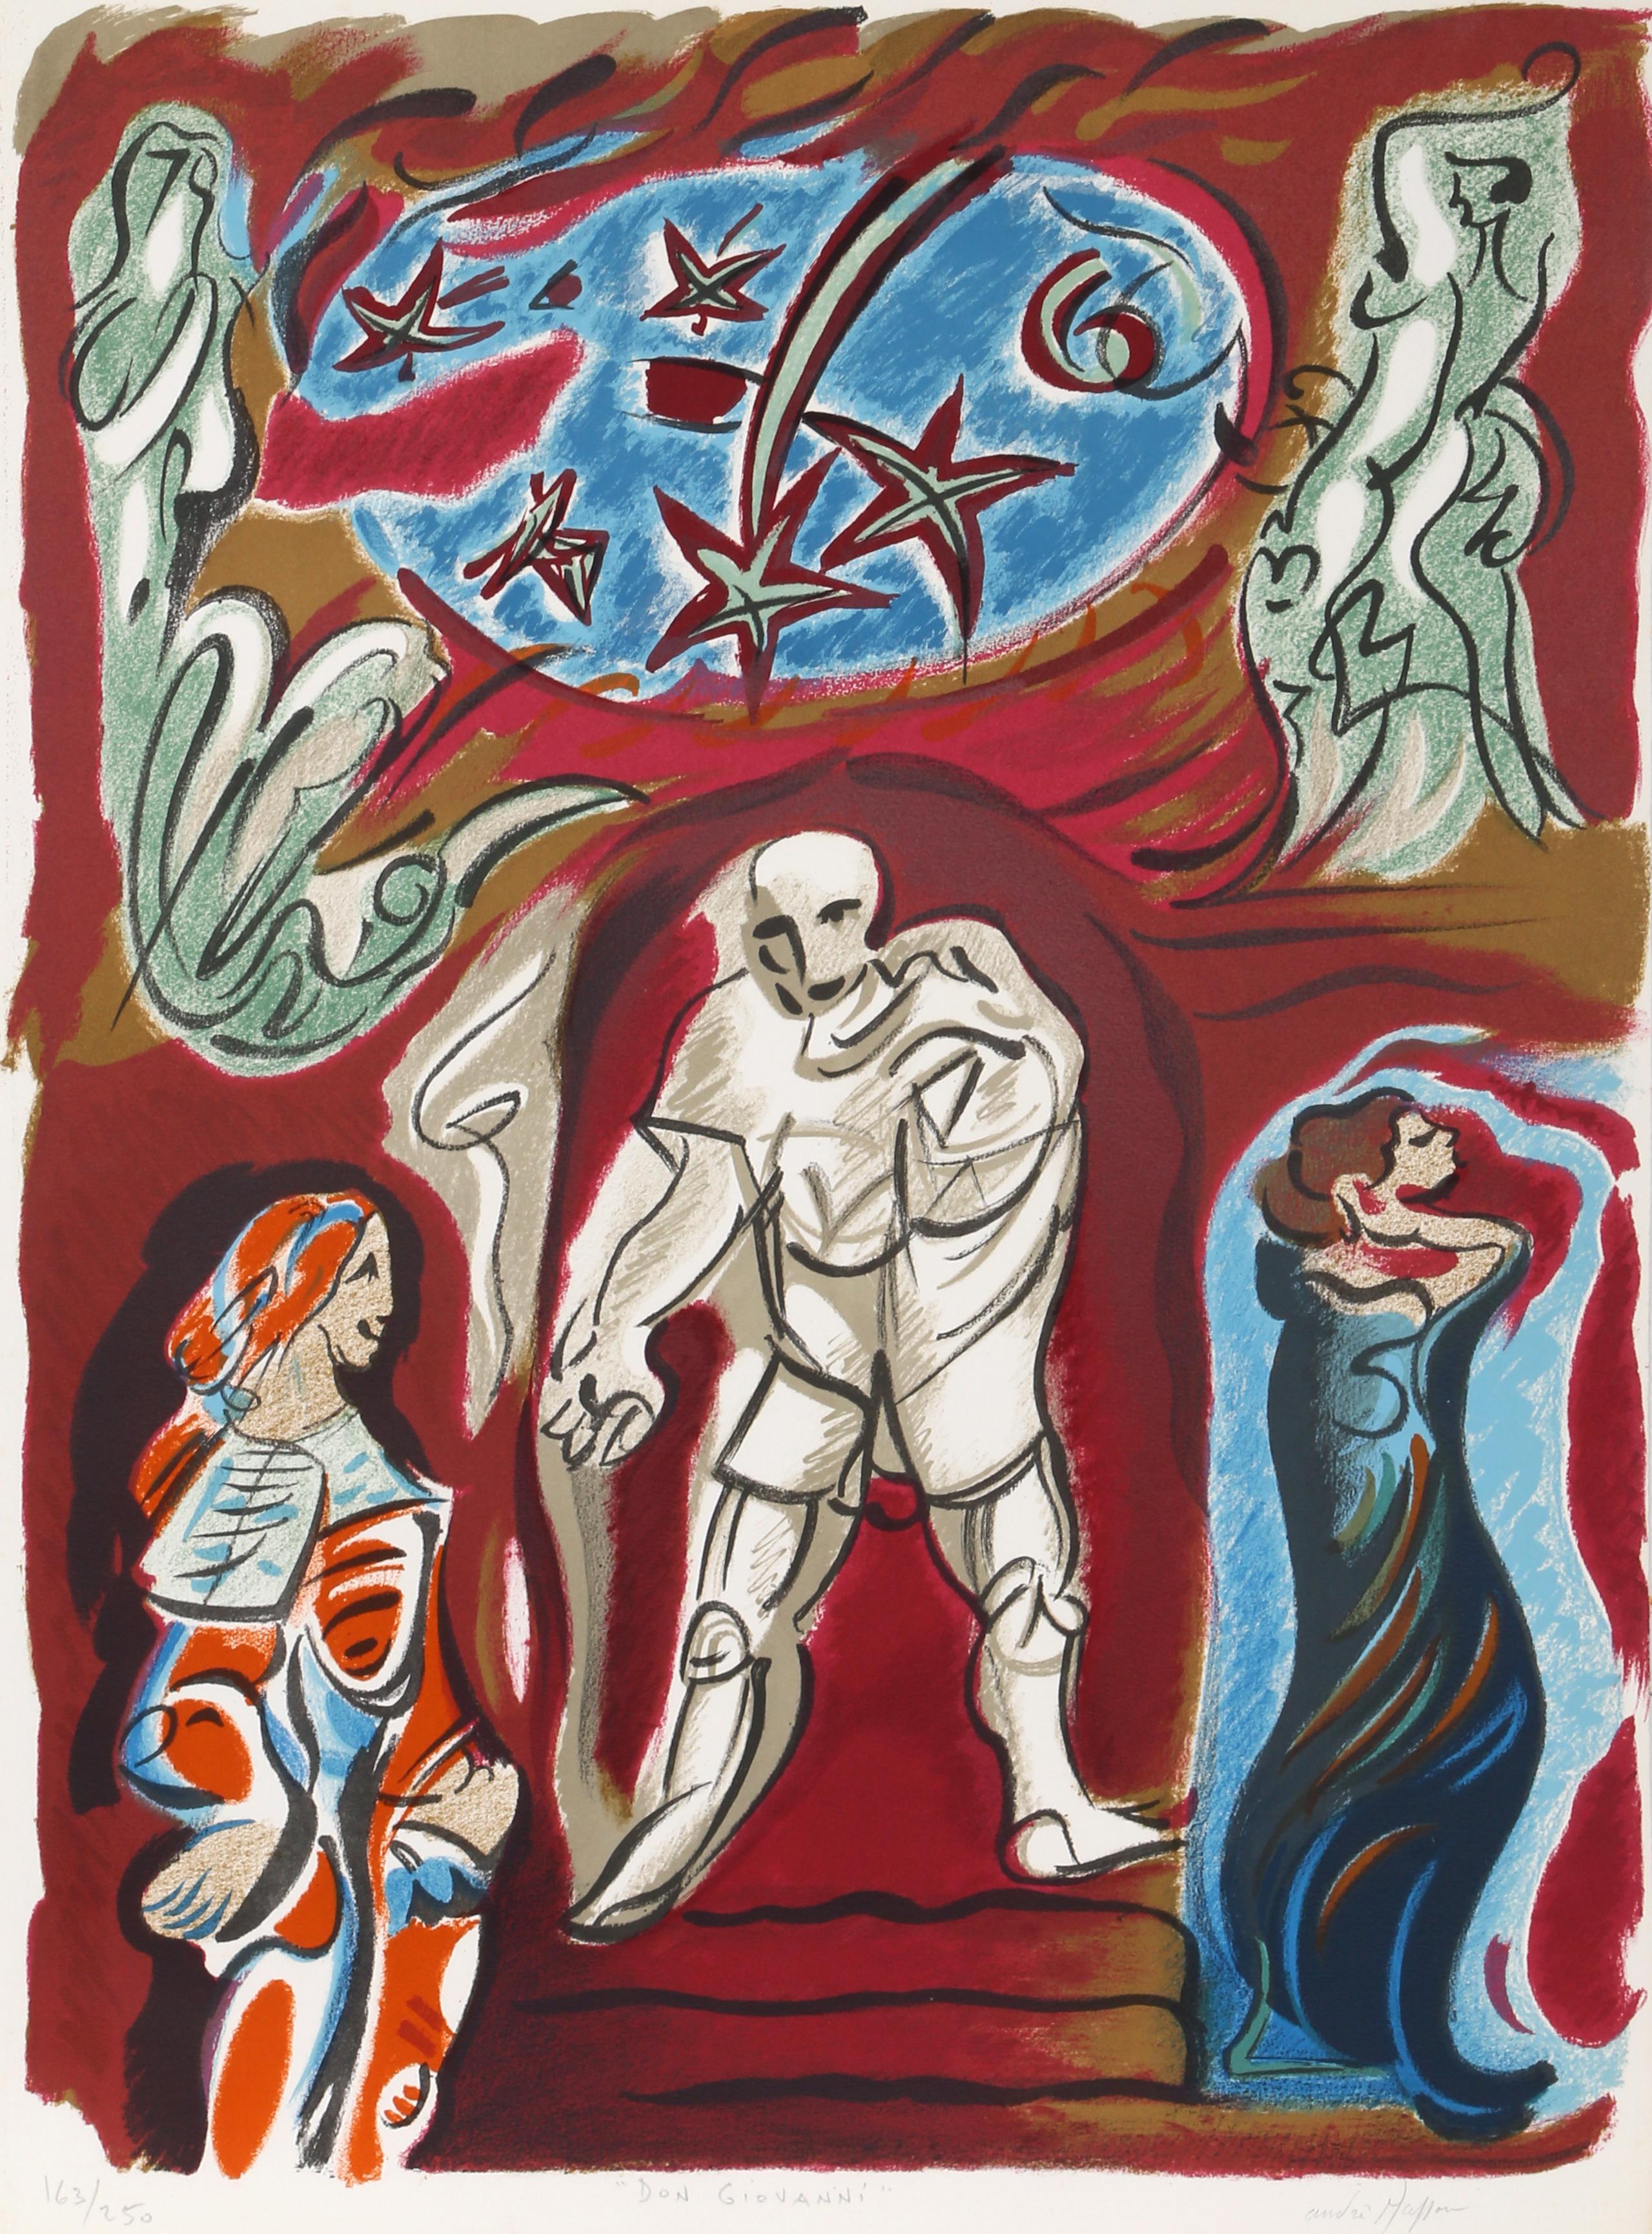 Don Giovanni, Surreal Lithograph by Andre Masson